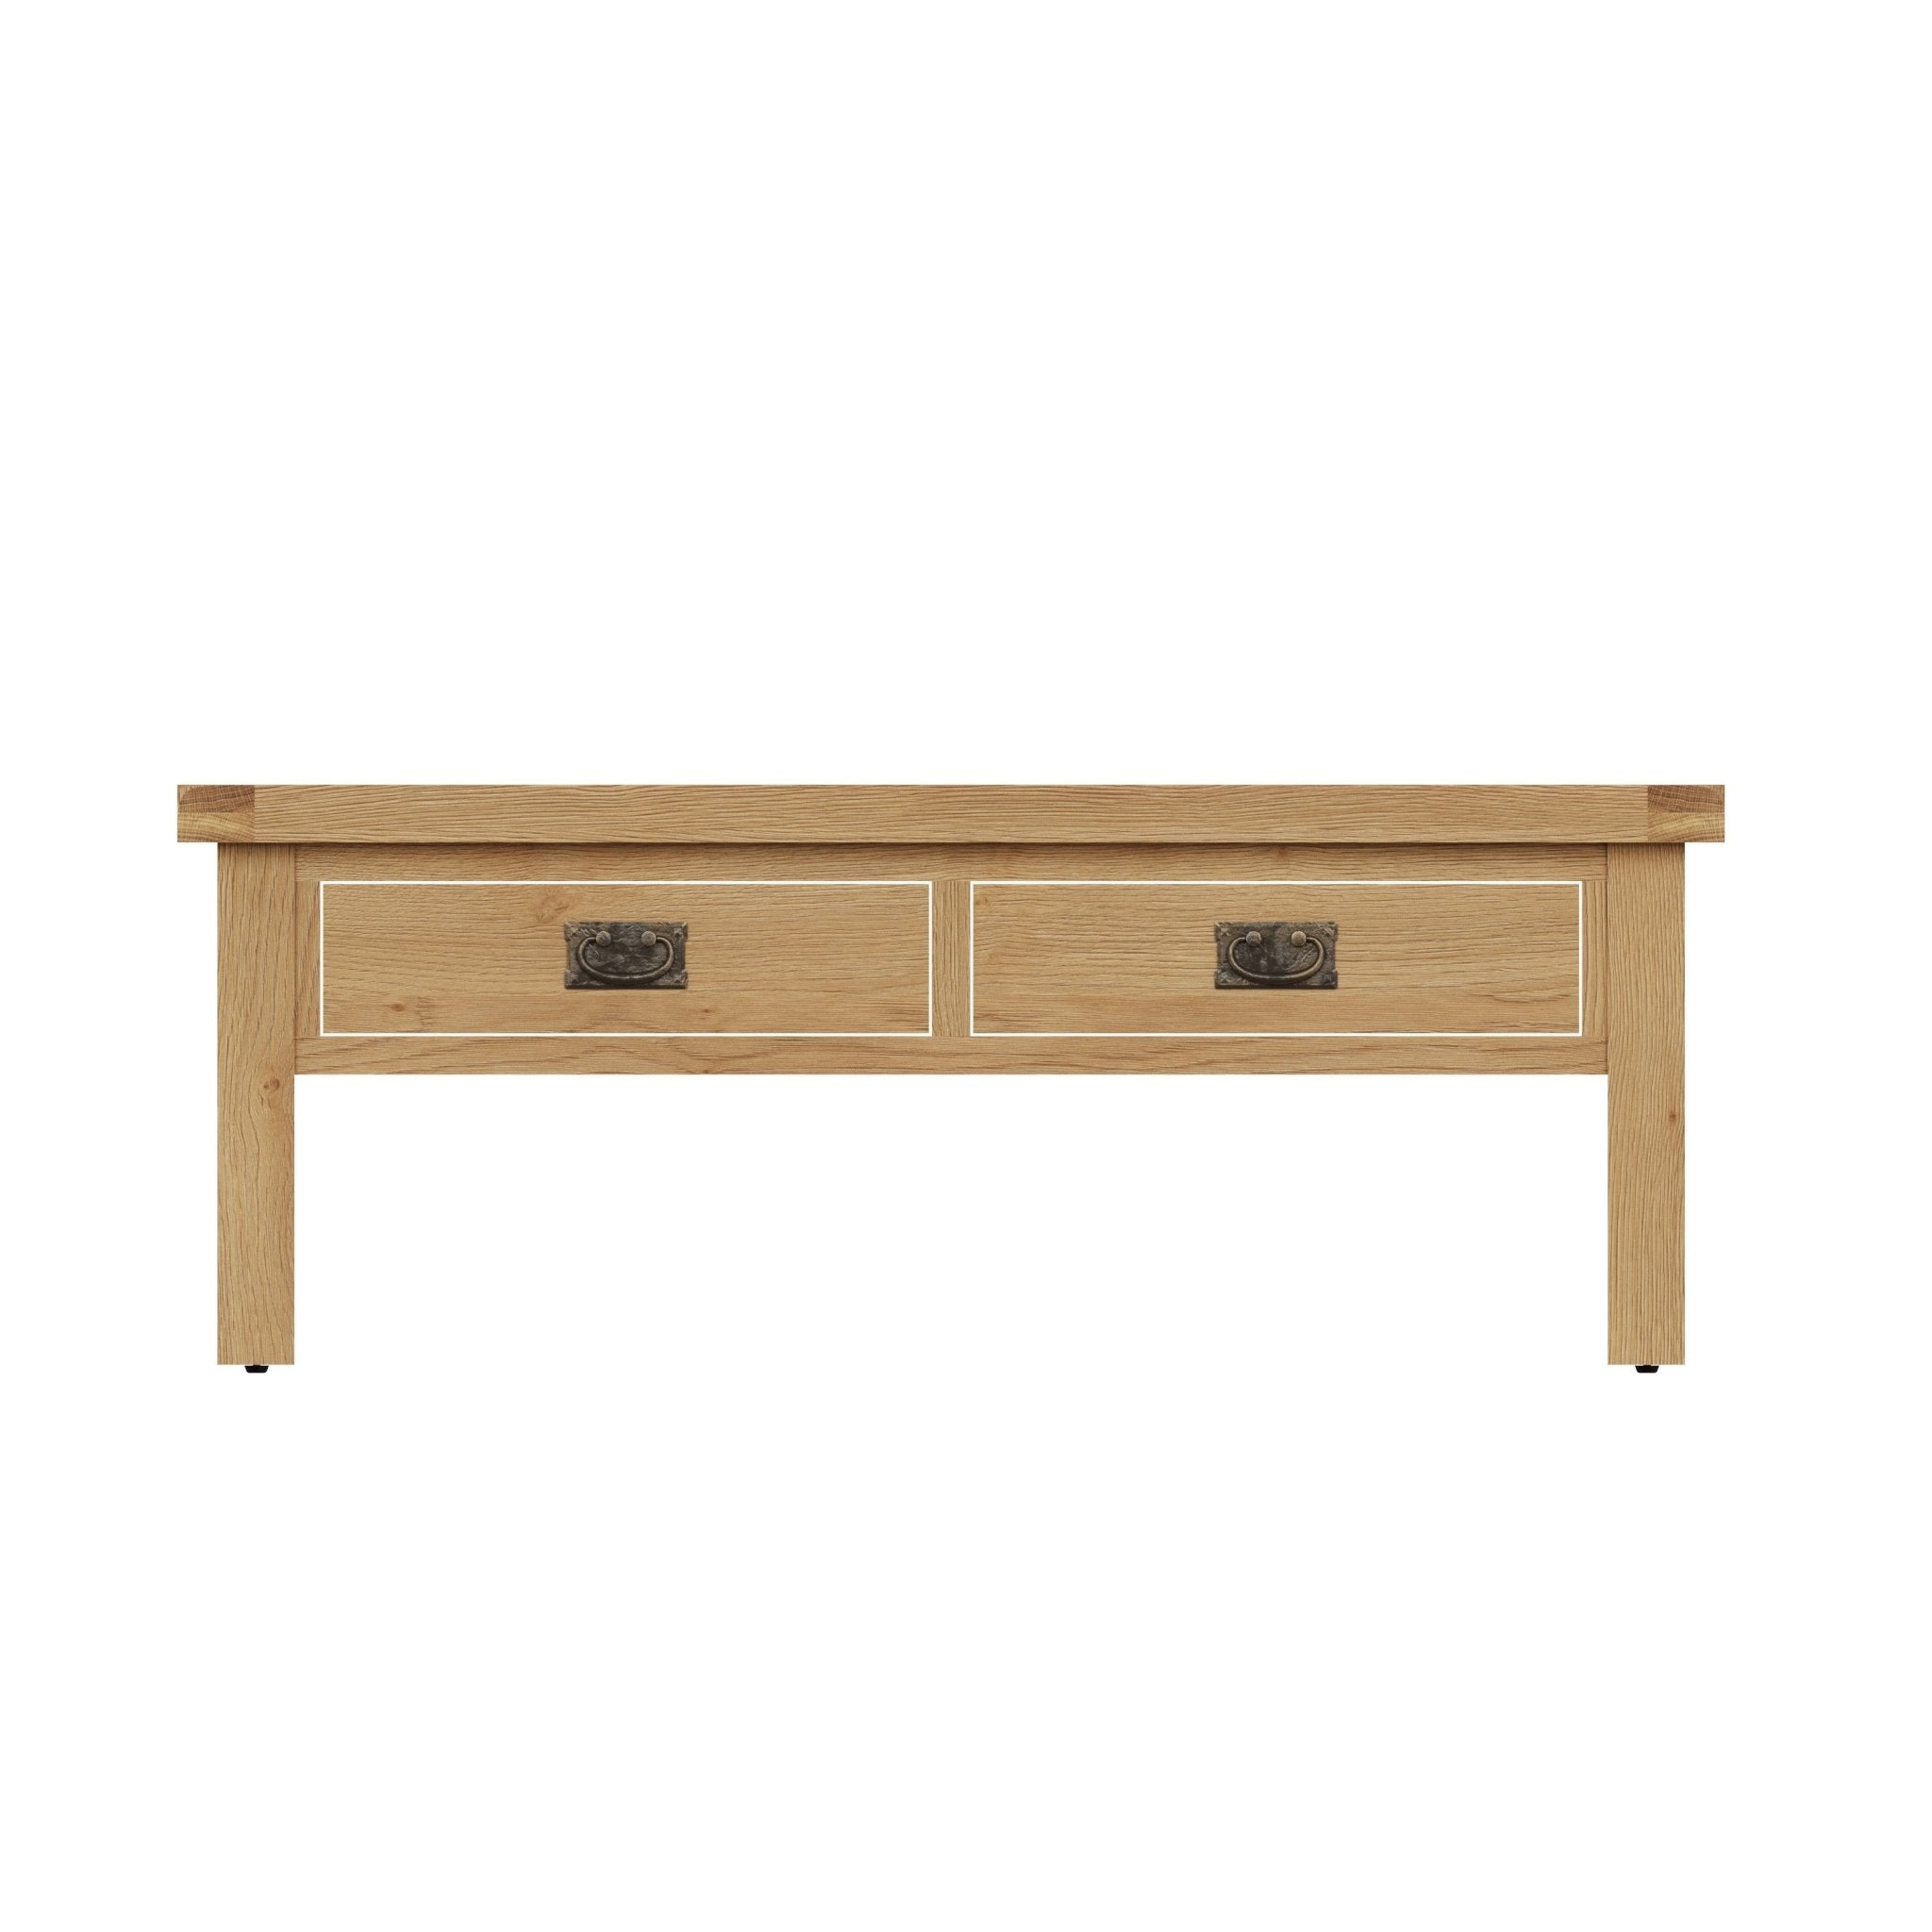 Kirdford Oak Coffee Table with 2 Drawers - Duck Barn Interiors